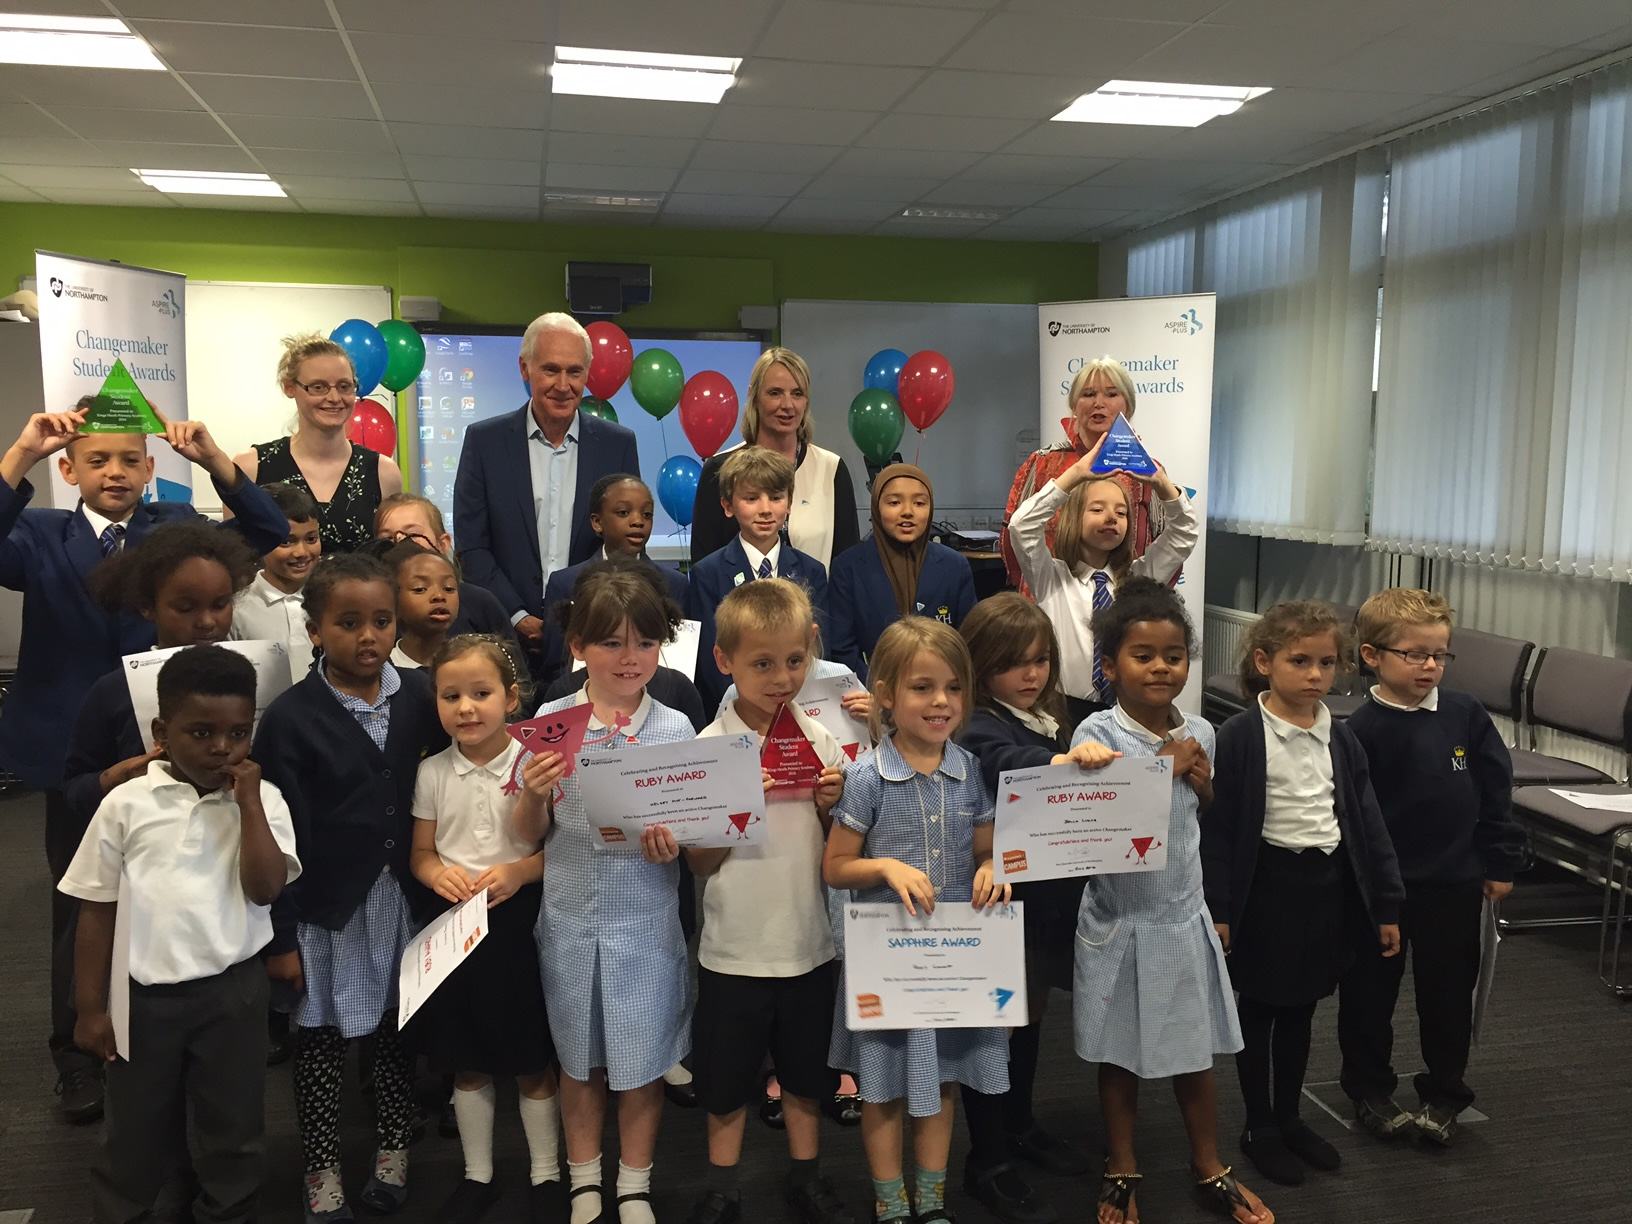 Pupils from Kings Heath Primary School